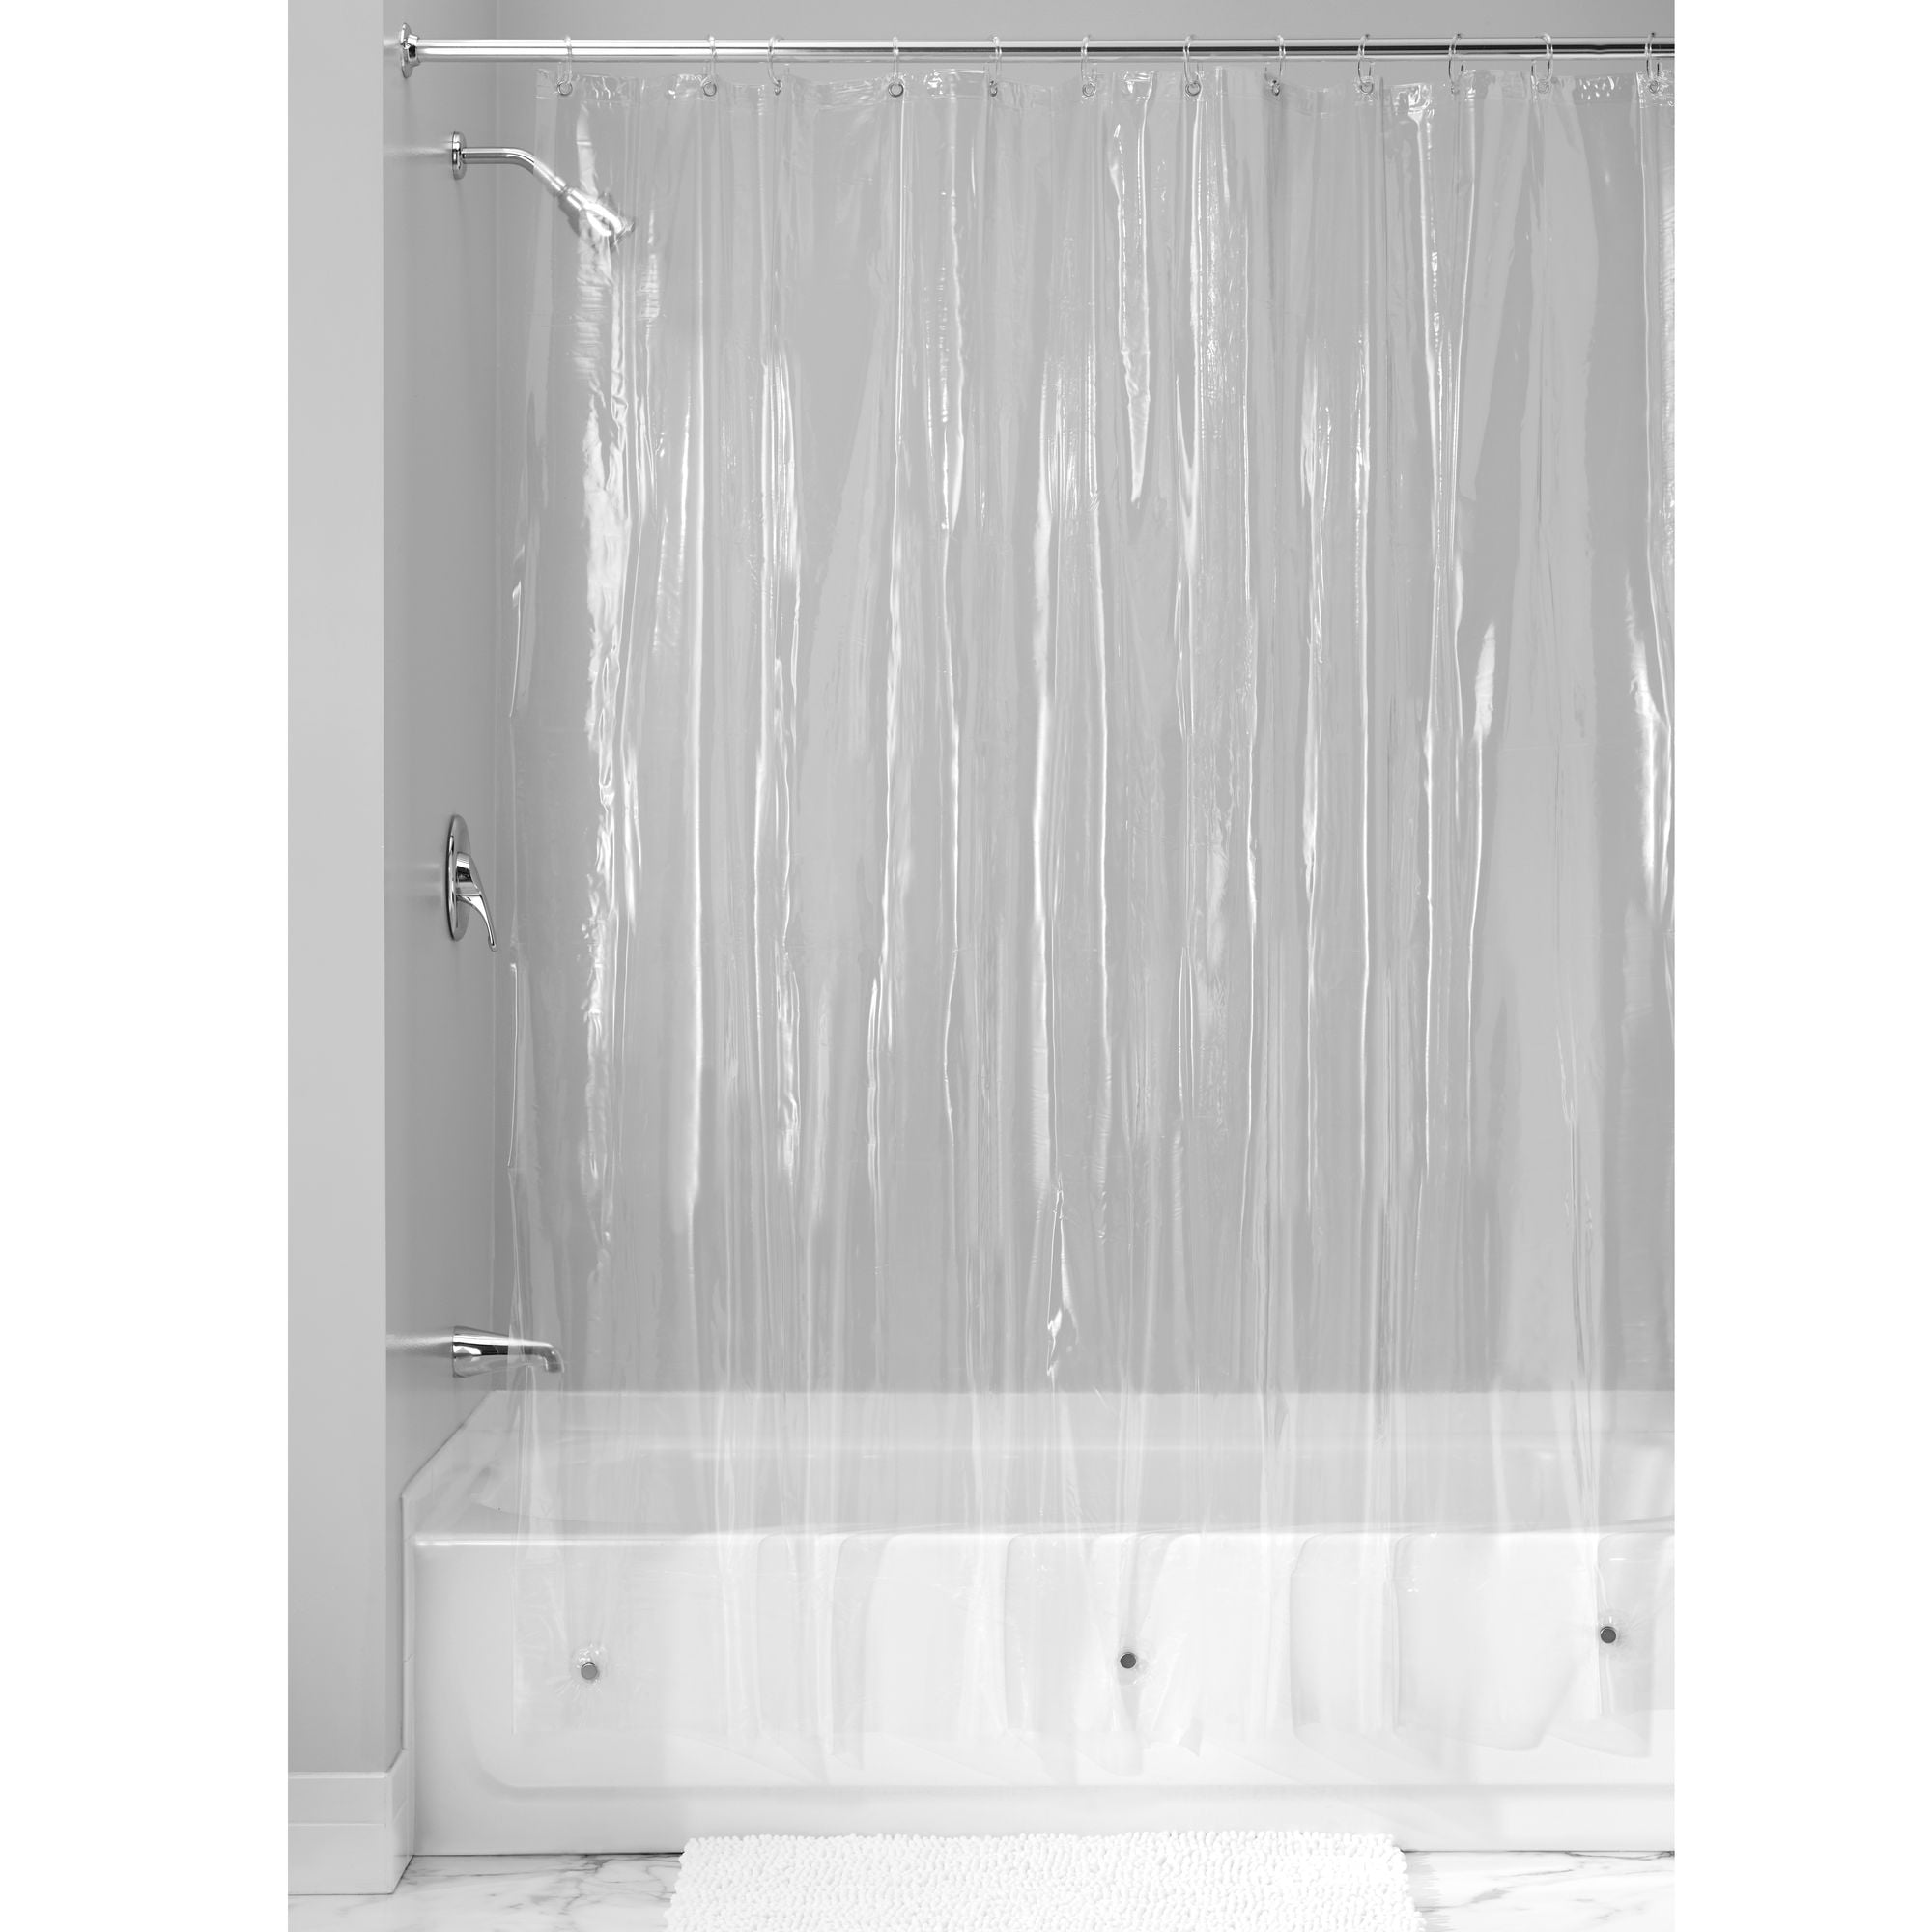 2 Bathroom Shower Curtain Liner Clear Magnetic LOT OF 